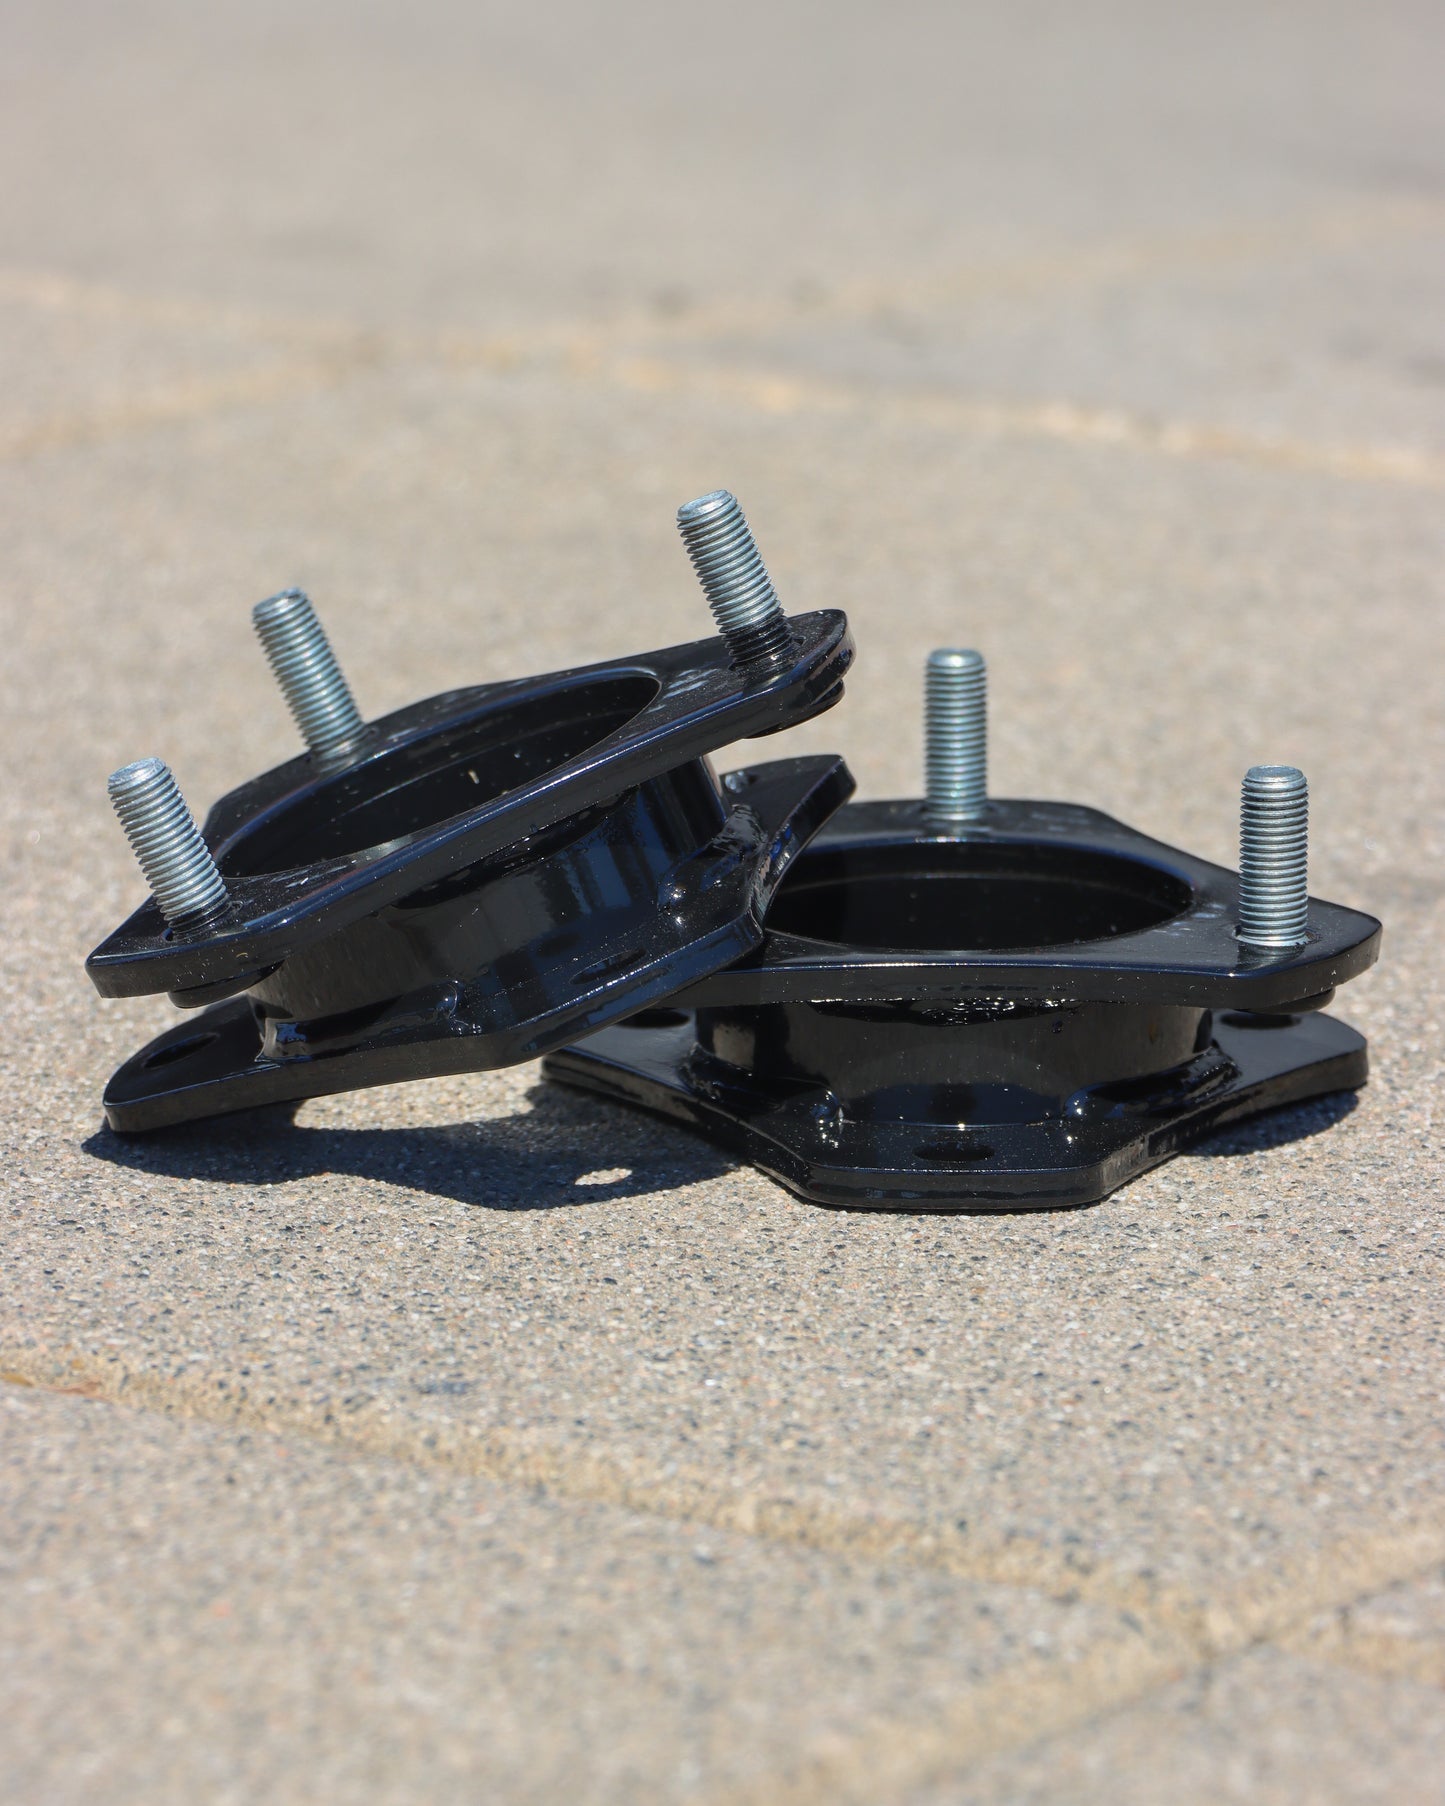 Strut spacers lying on the ground.